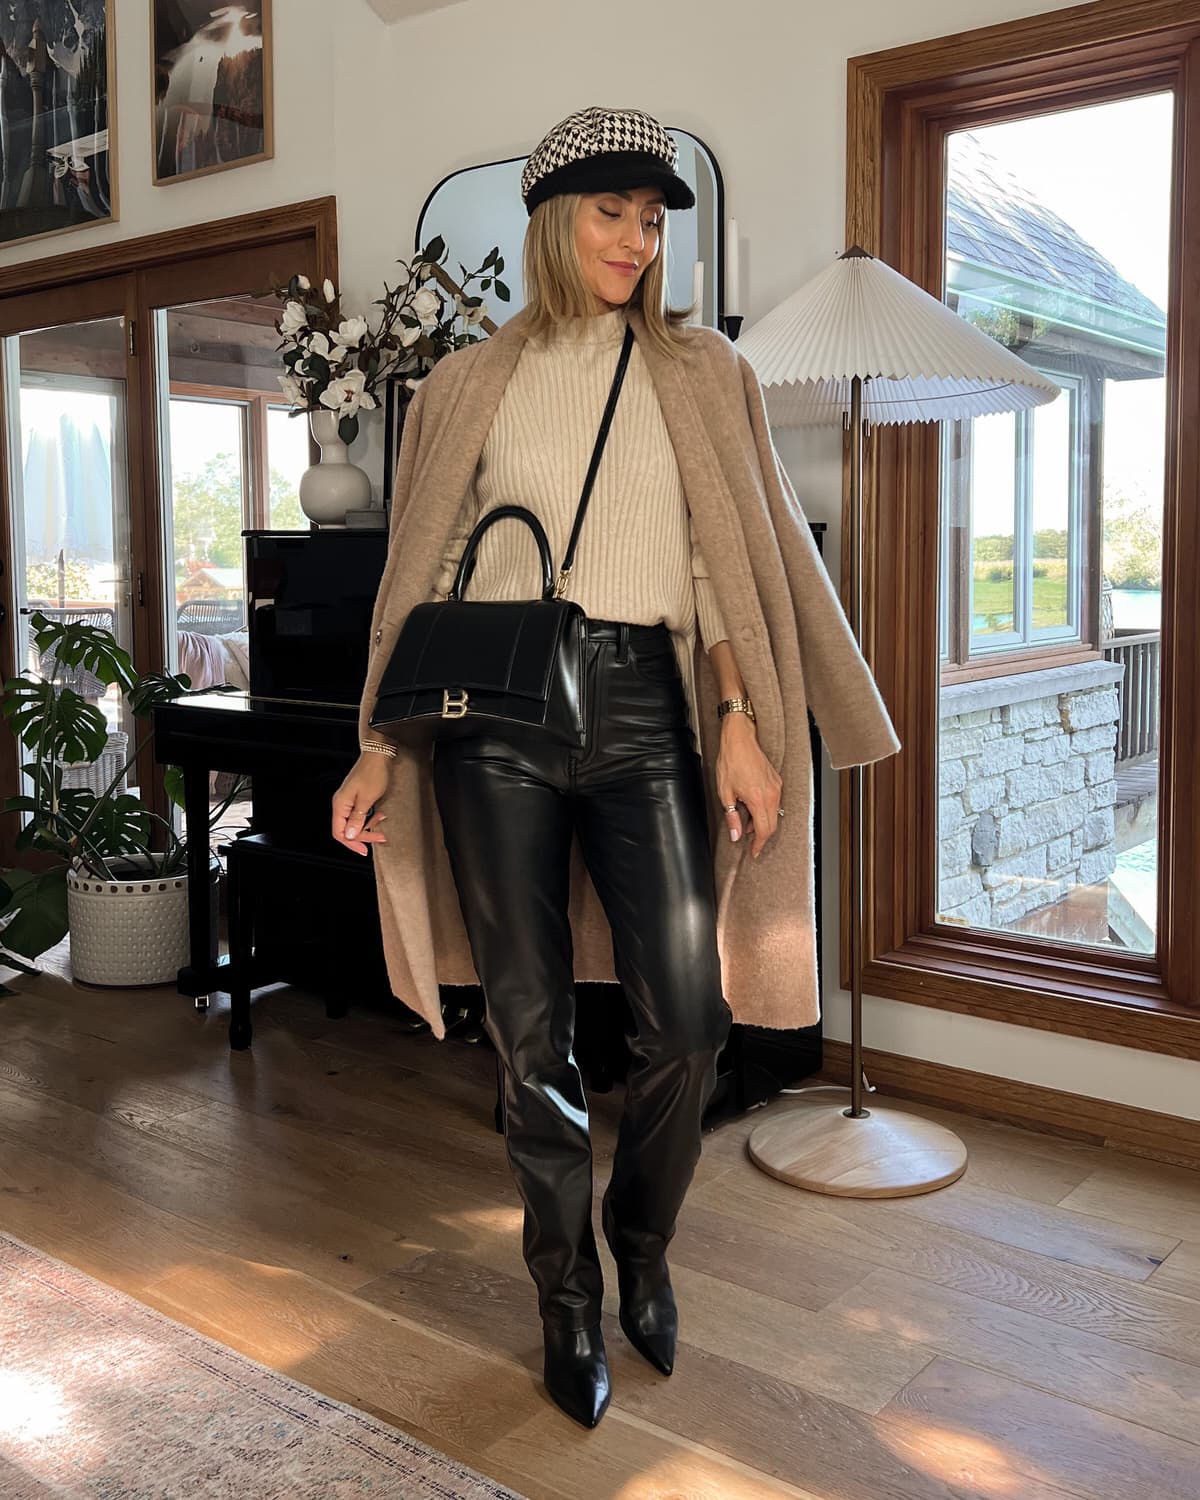 Karina wears leather pants with Vince sweater and cardi coat